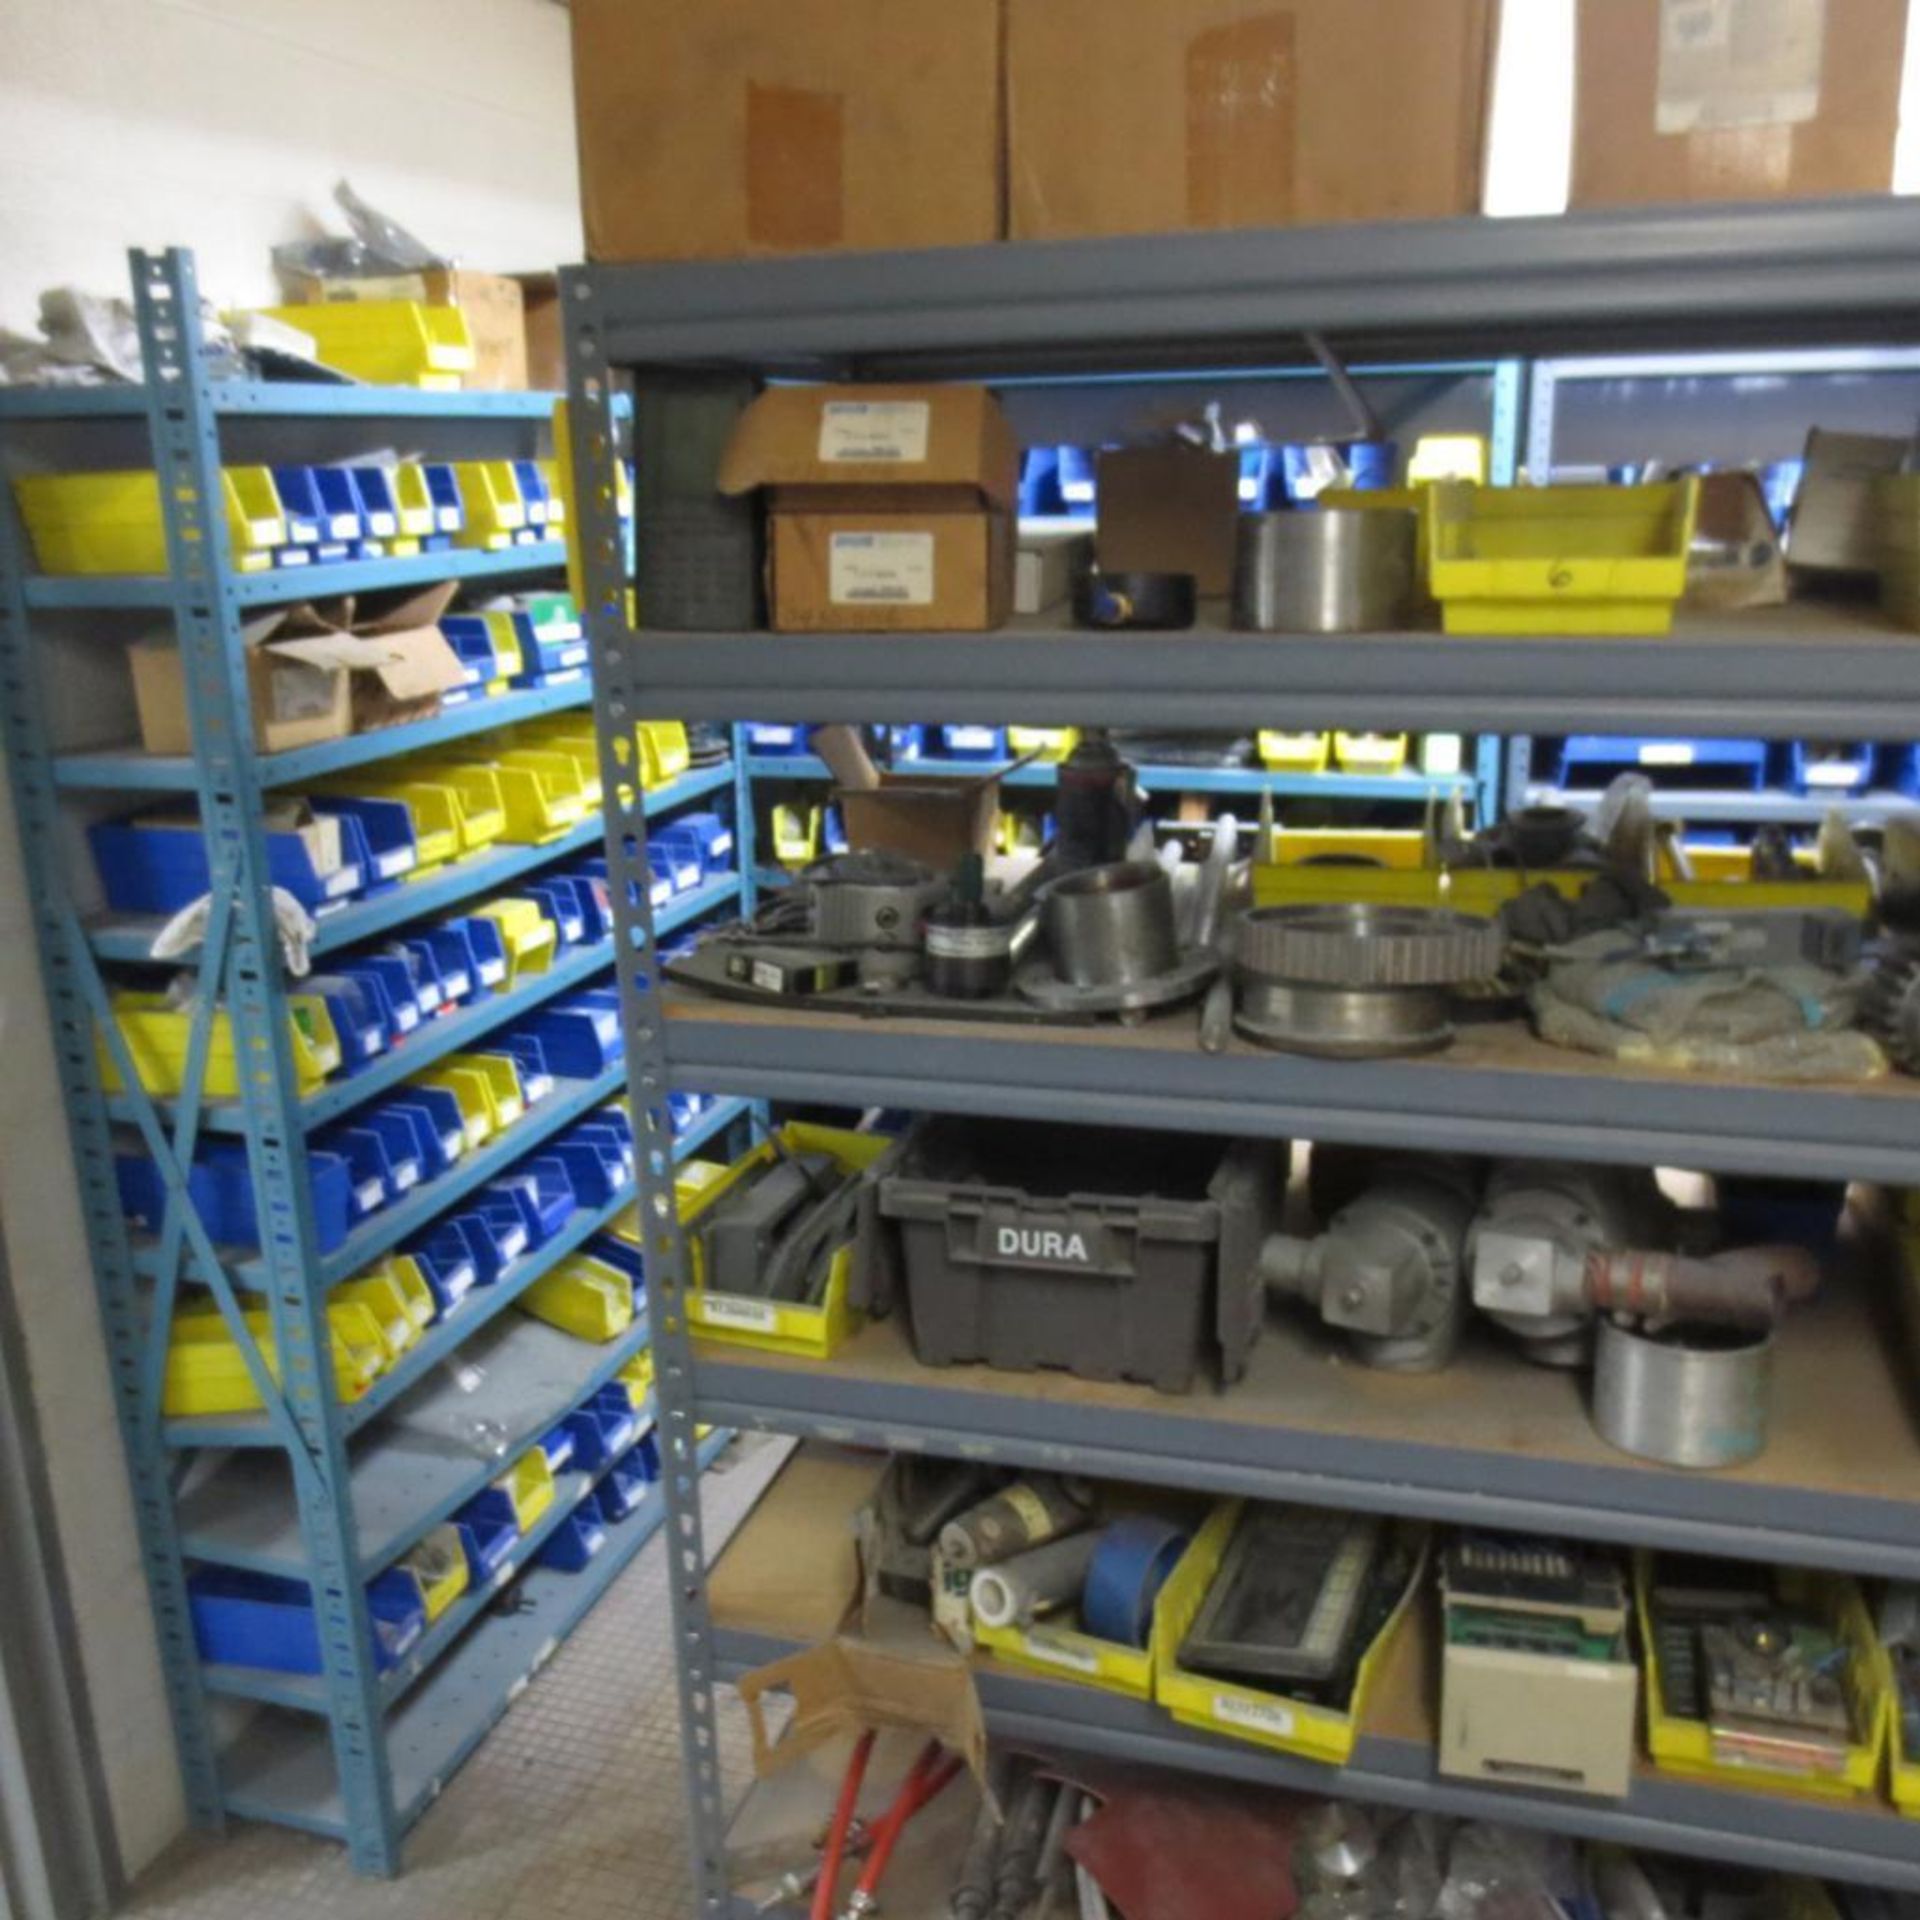 Parts Room Consisting of Gears, Electric Boards, Motors, AB Item, Filters, Motor Starters and Parts - Image 2 of 42